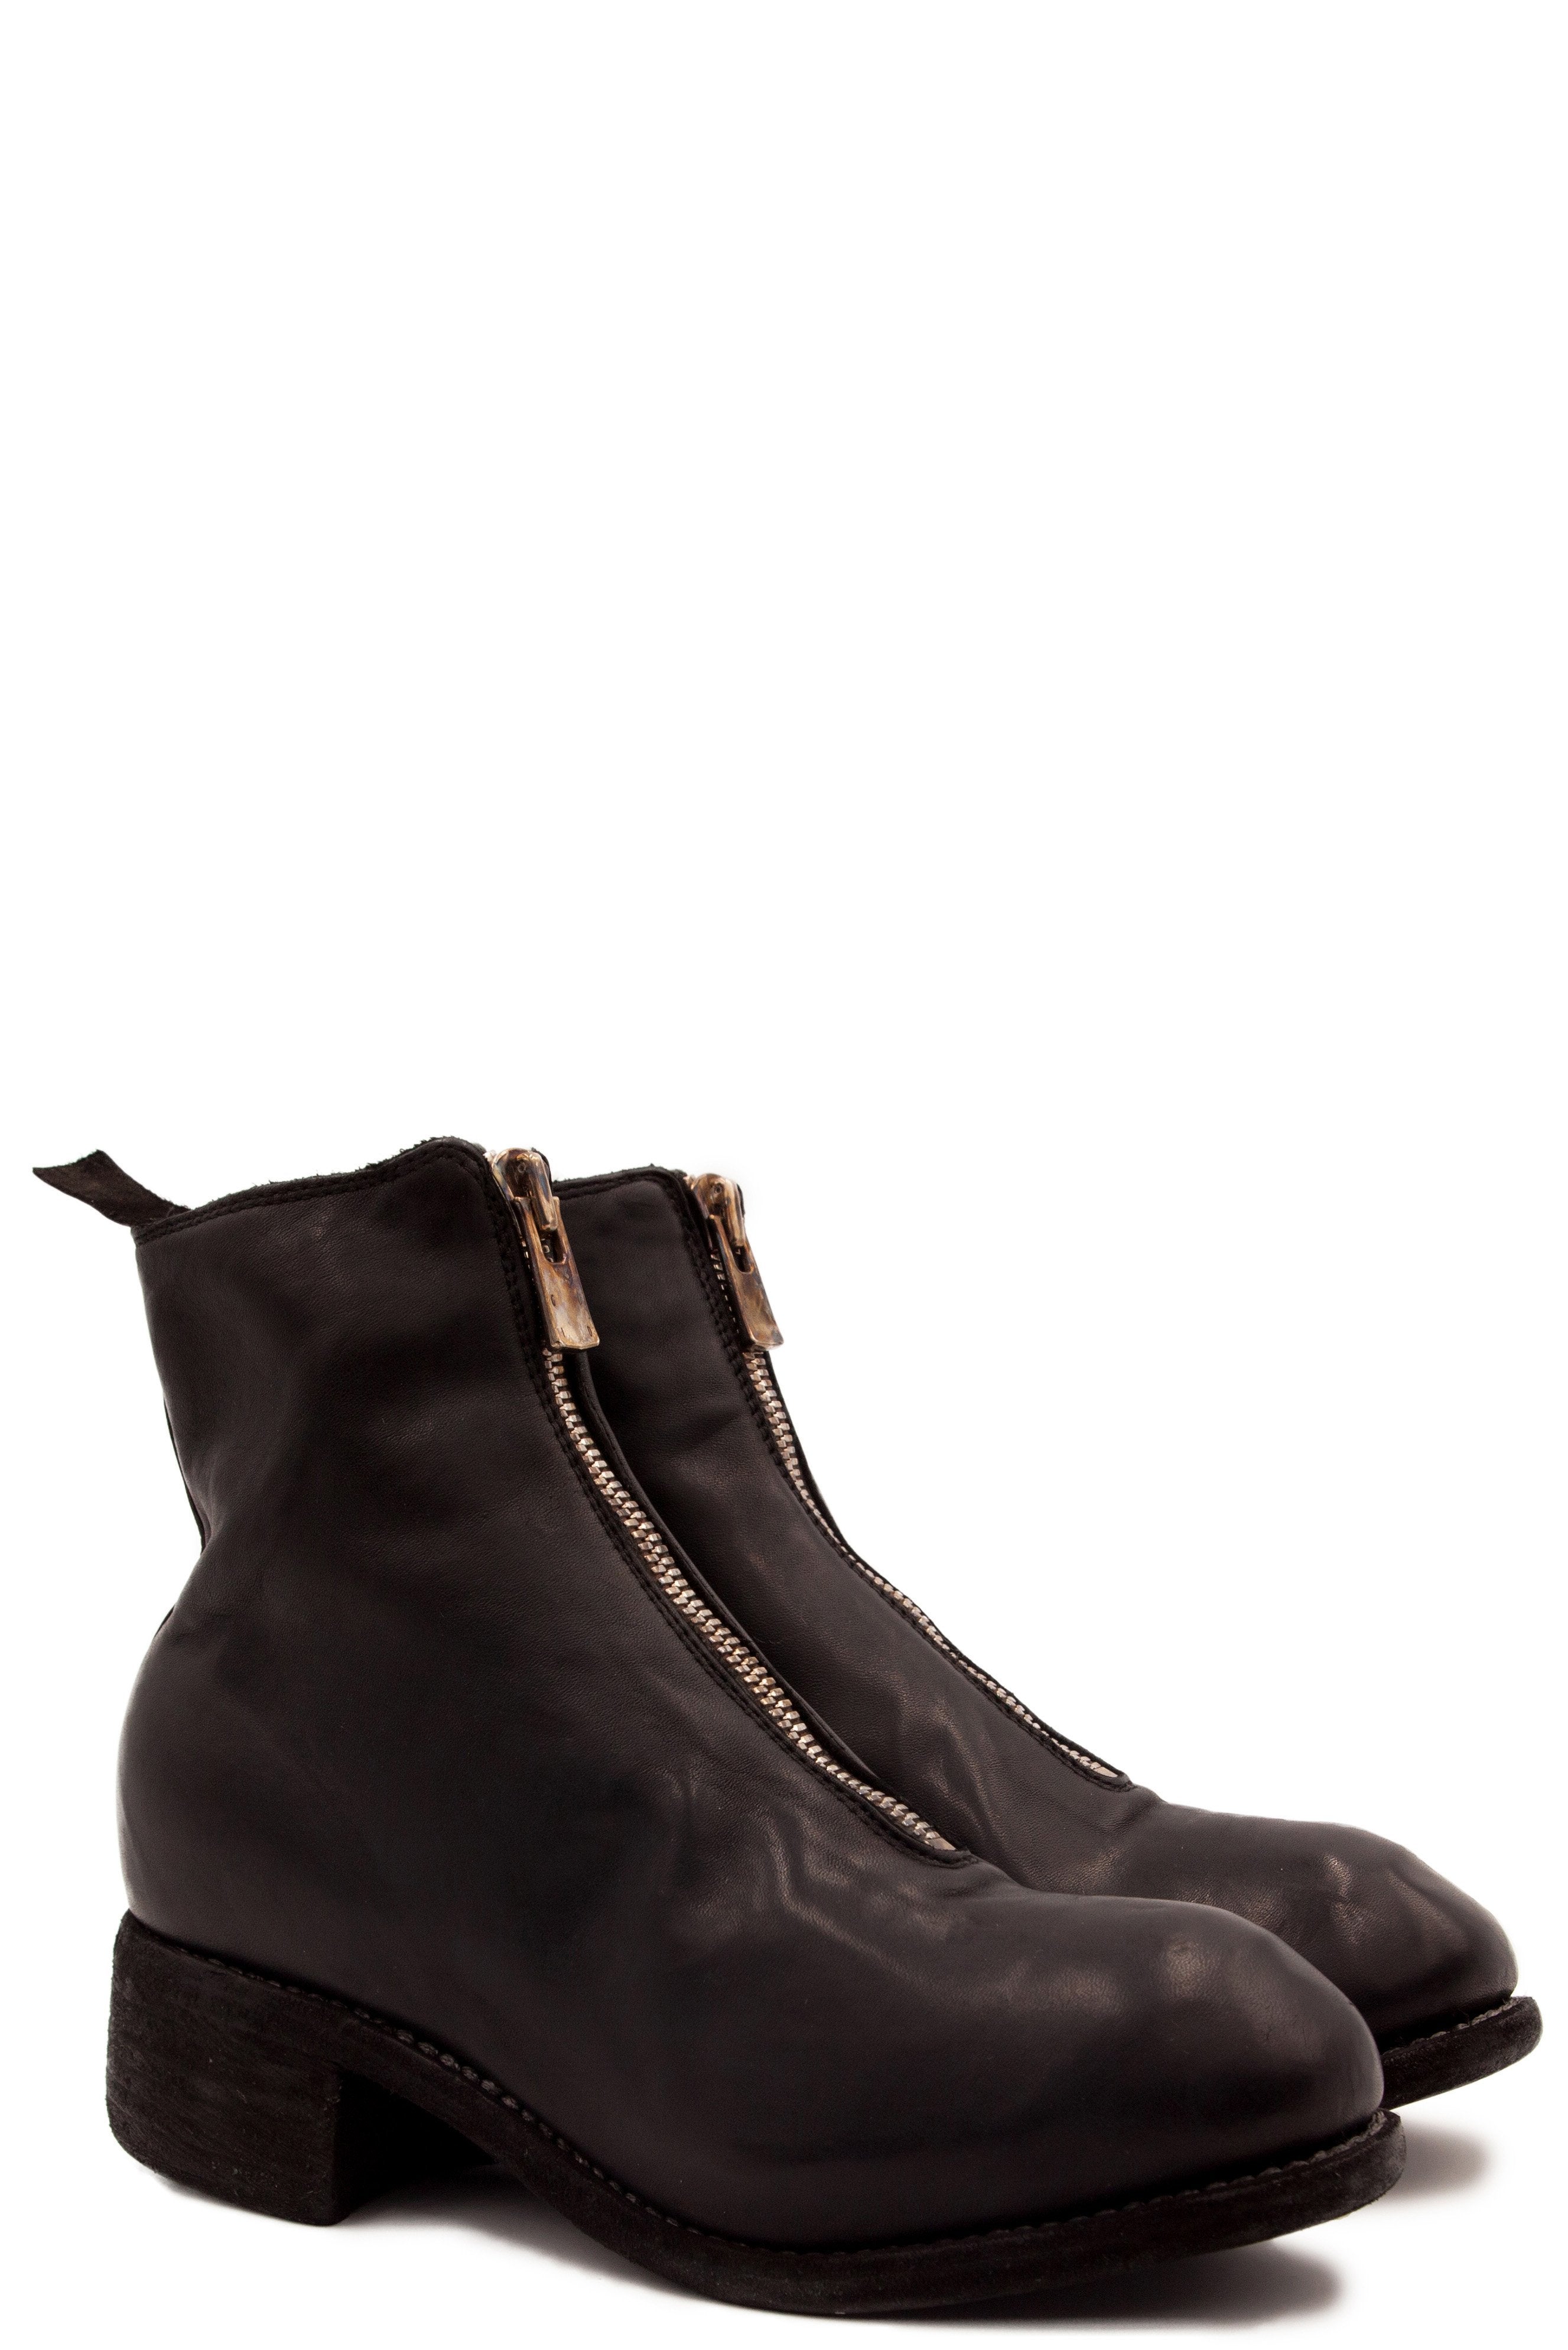 Guidi PL1 Black - Front ZIp Boots | UJNG